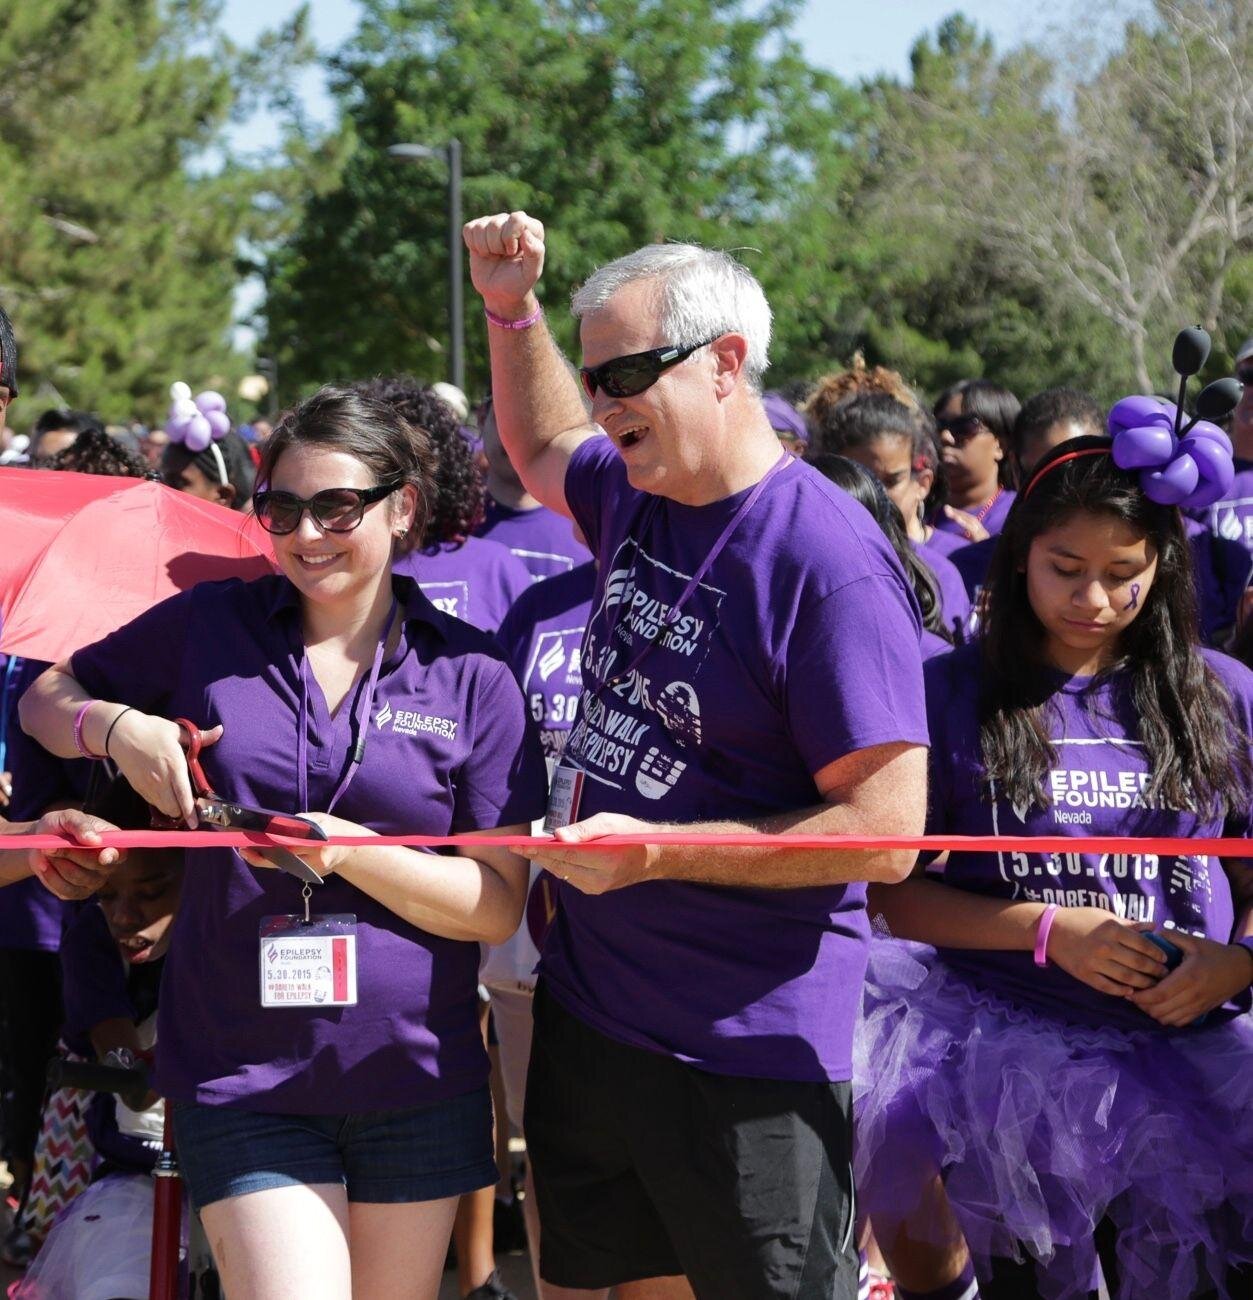  Phil, working together with leader and founder of the Epilepsy Foundation of Nevada, Danielle Marano, celebrates the ribbon cutting for the first annual Walk to End Epilepsy in Nevada. Danielle continues to elevate the level of impact in Nevada! 